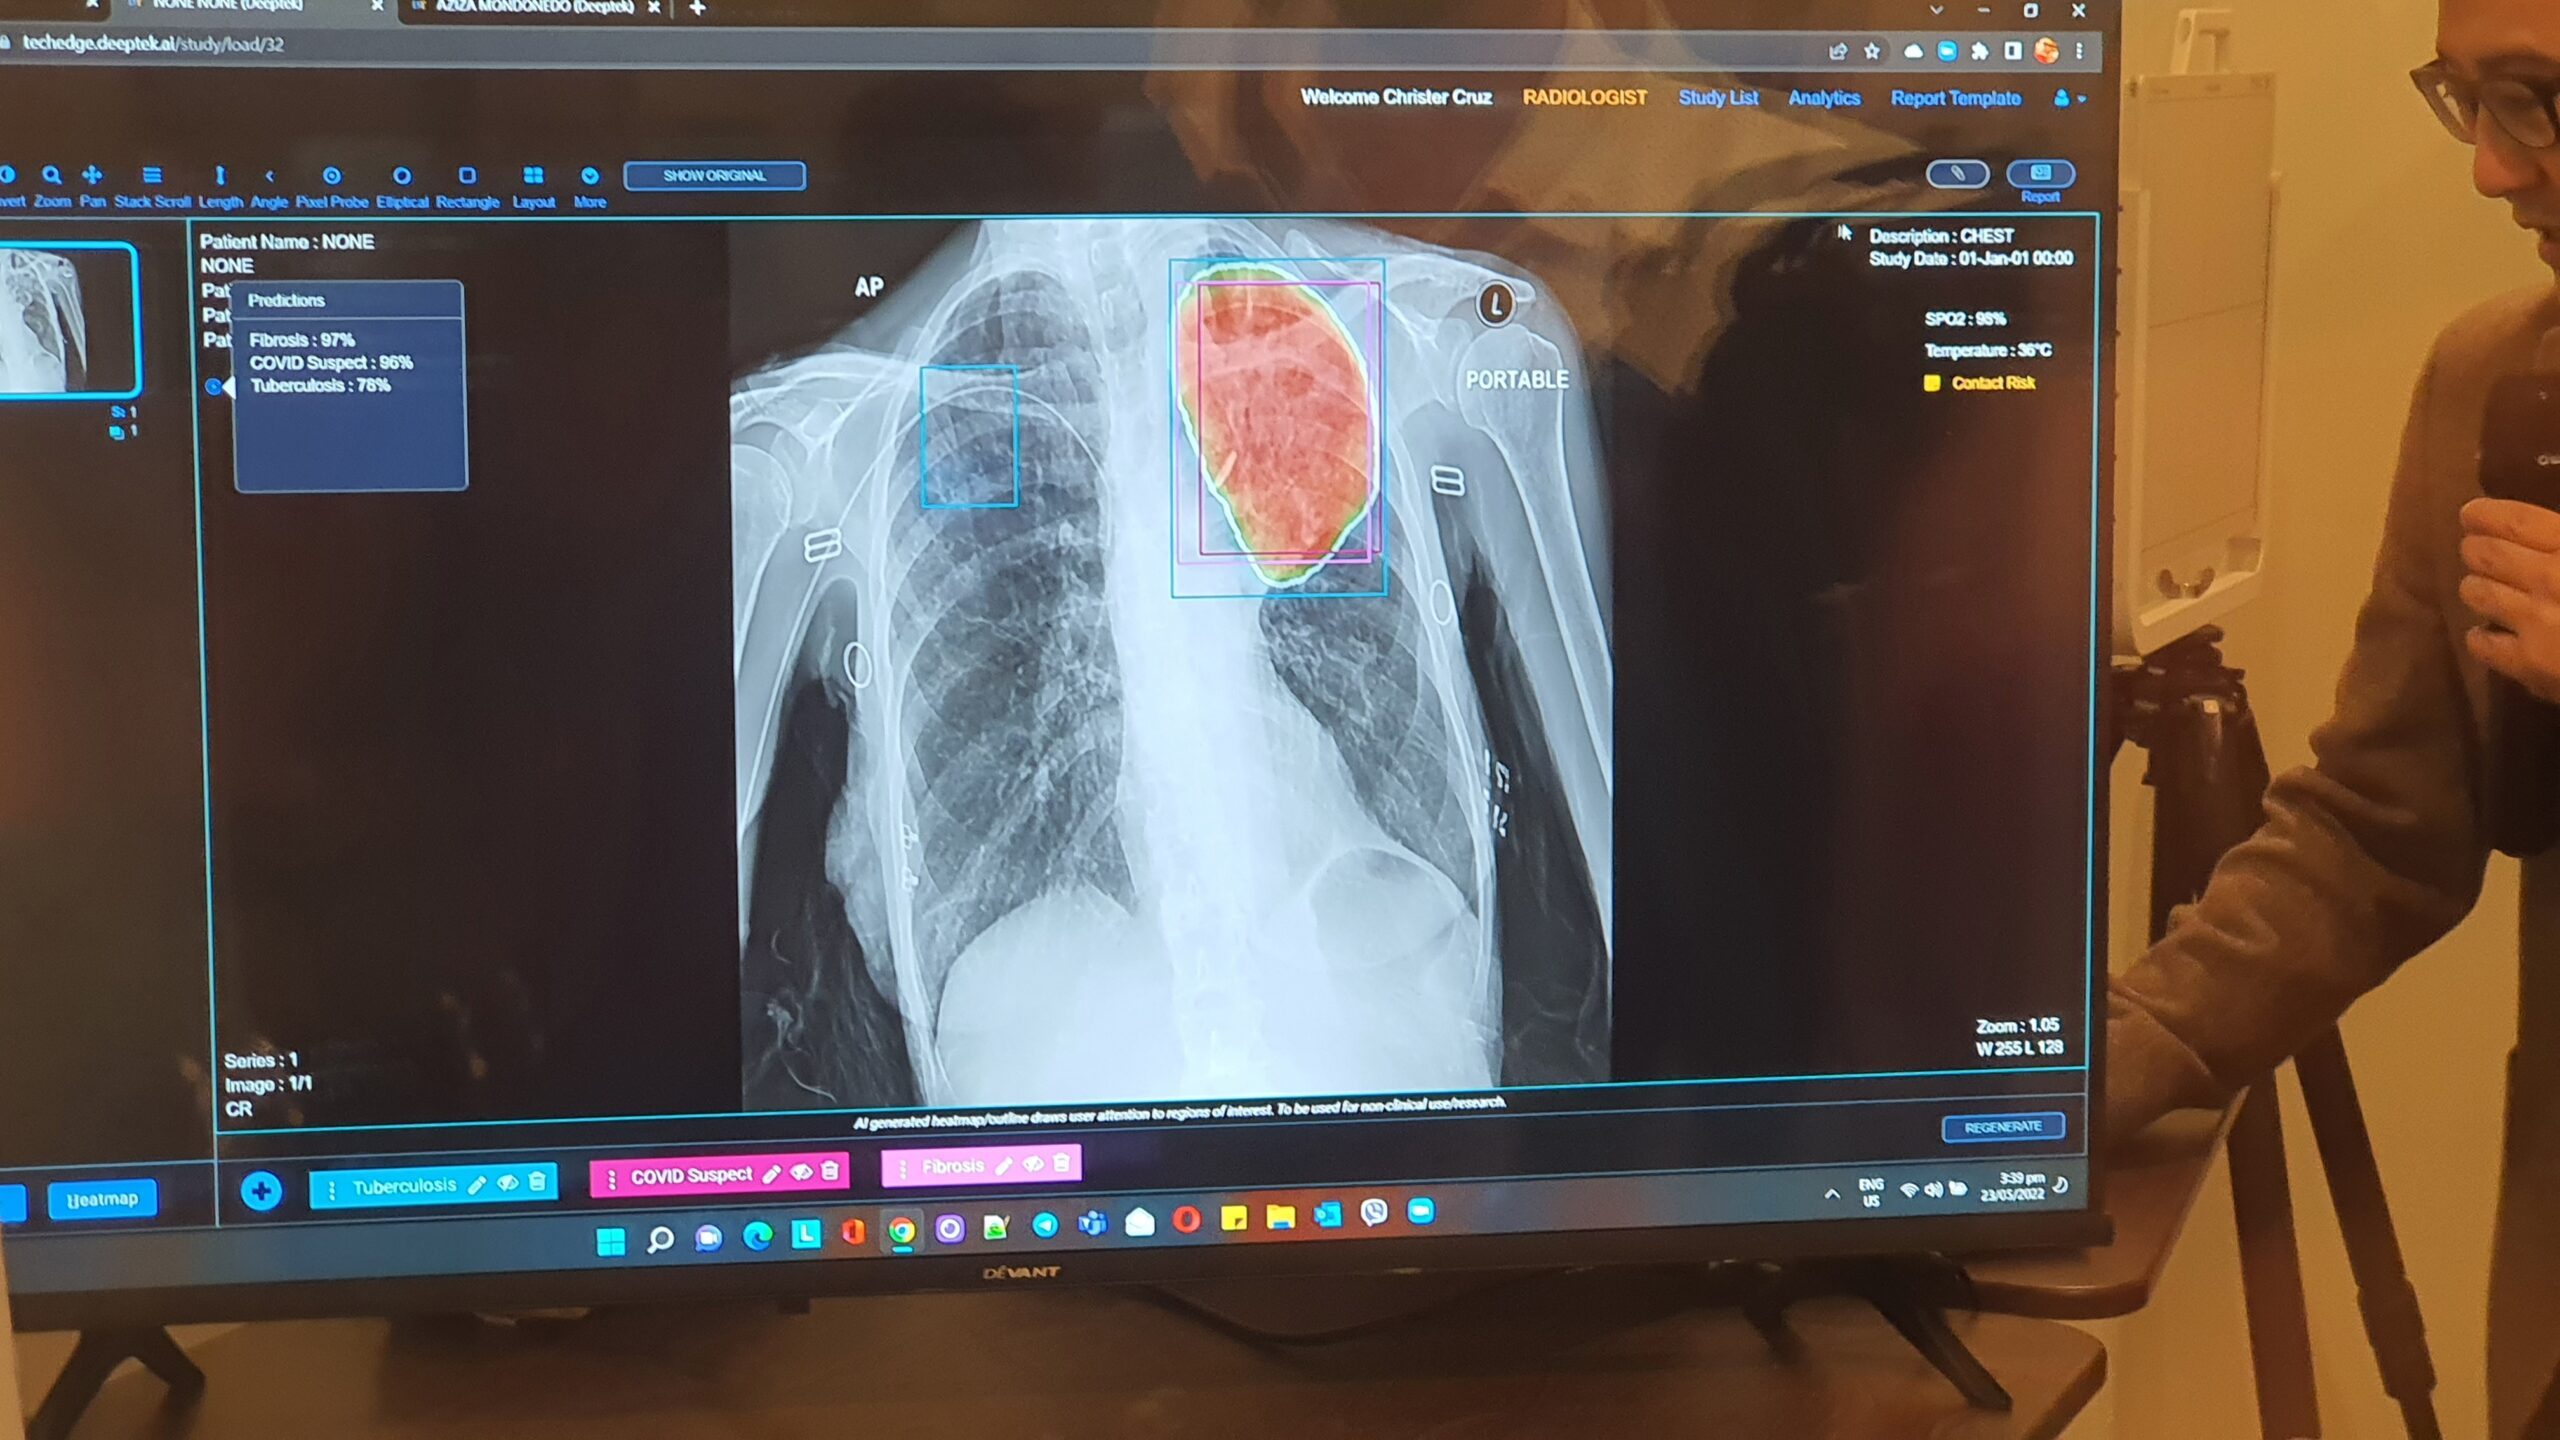 Maxicare, startup Advanced Abilities launch AI-powered x-ray platform